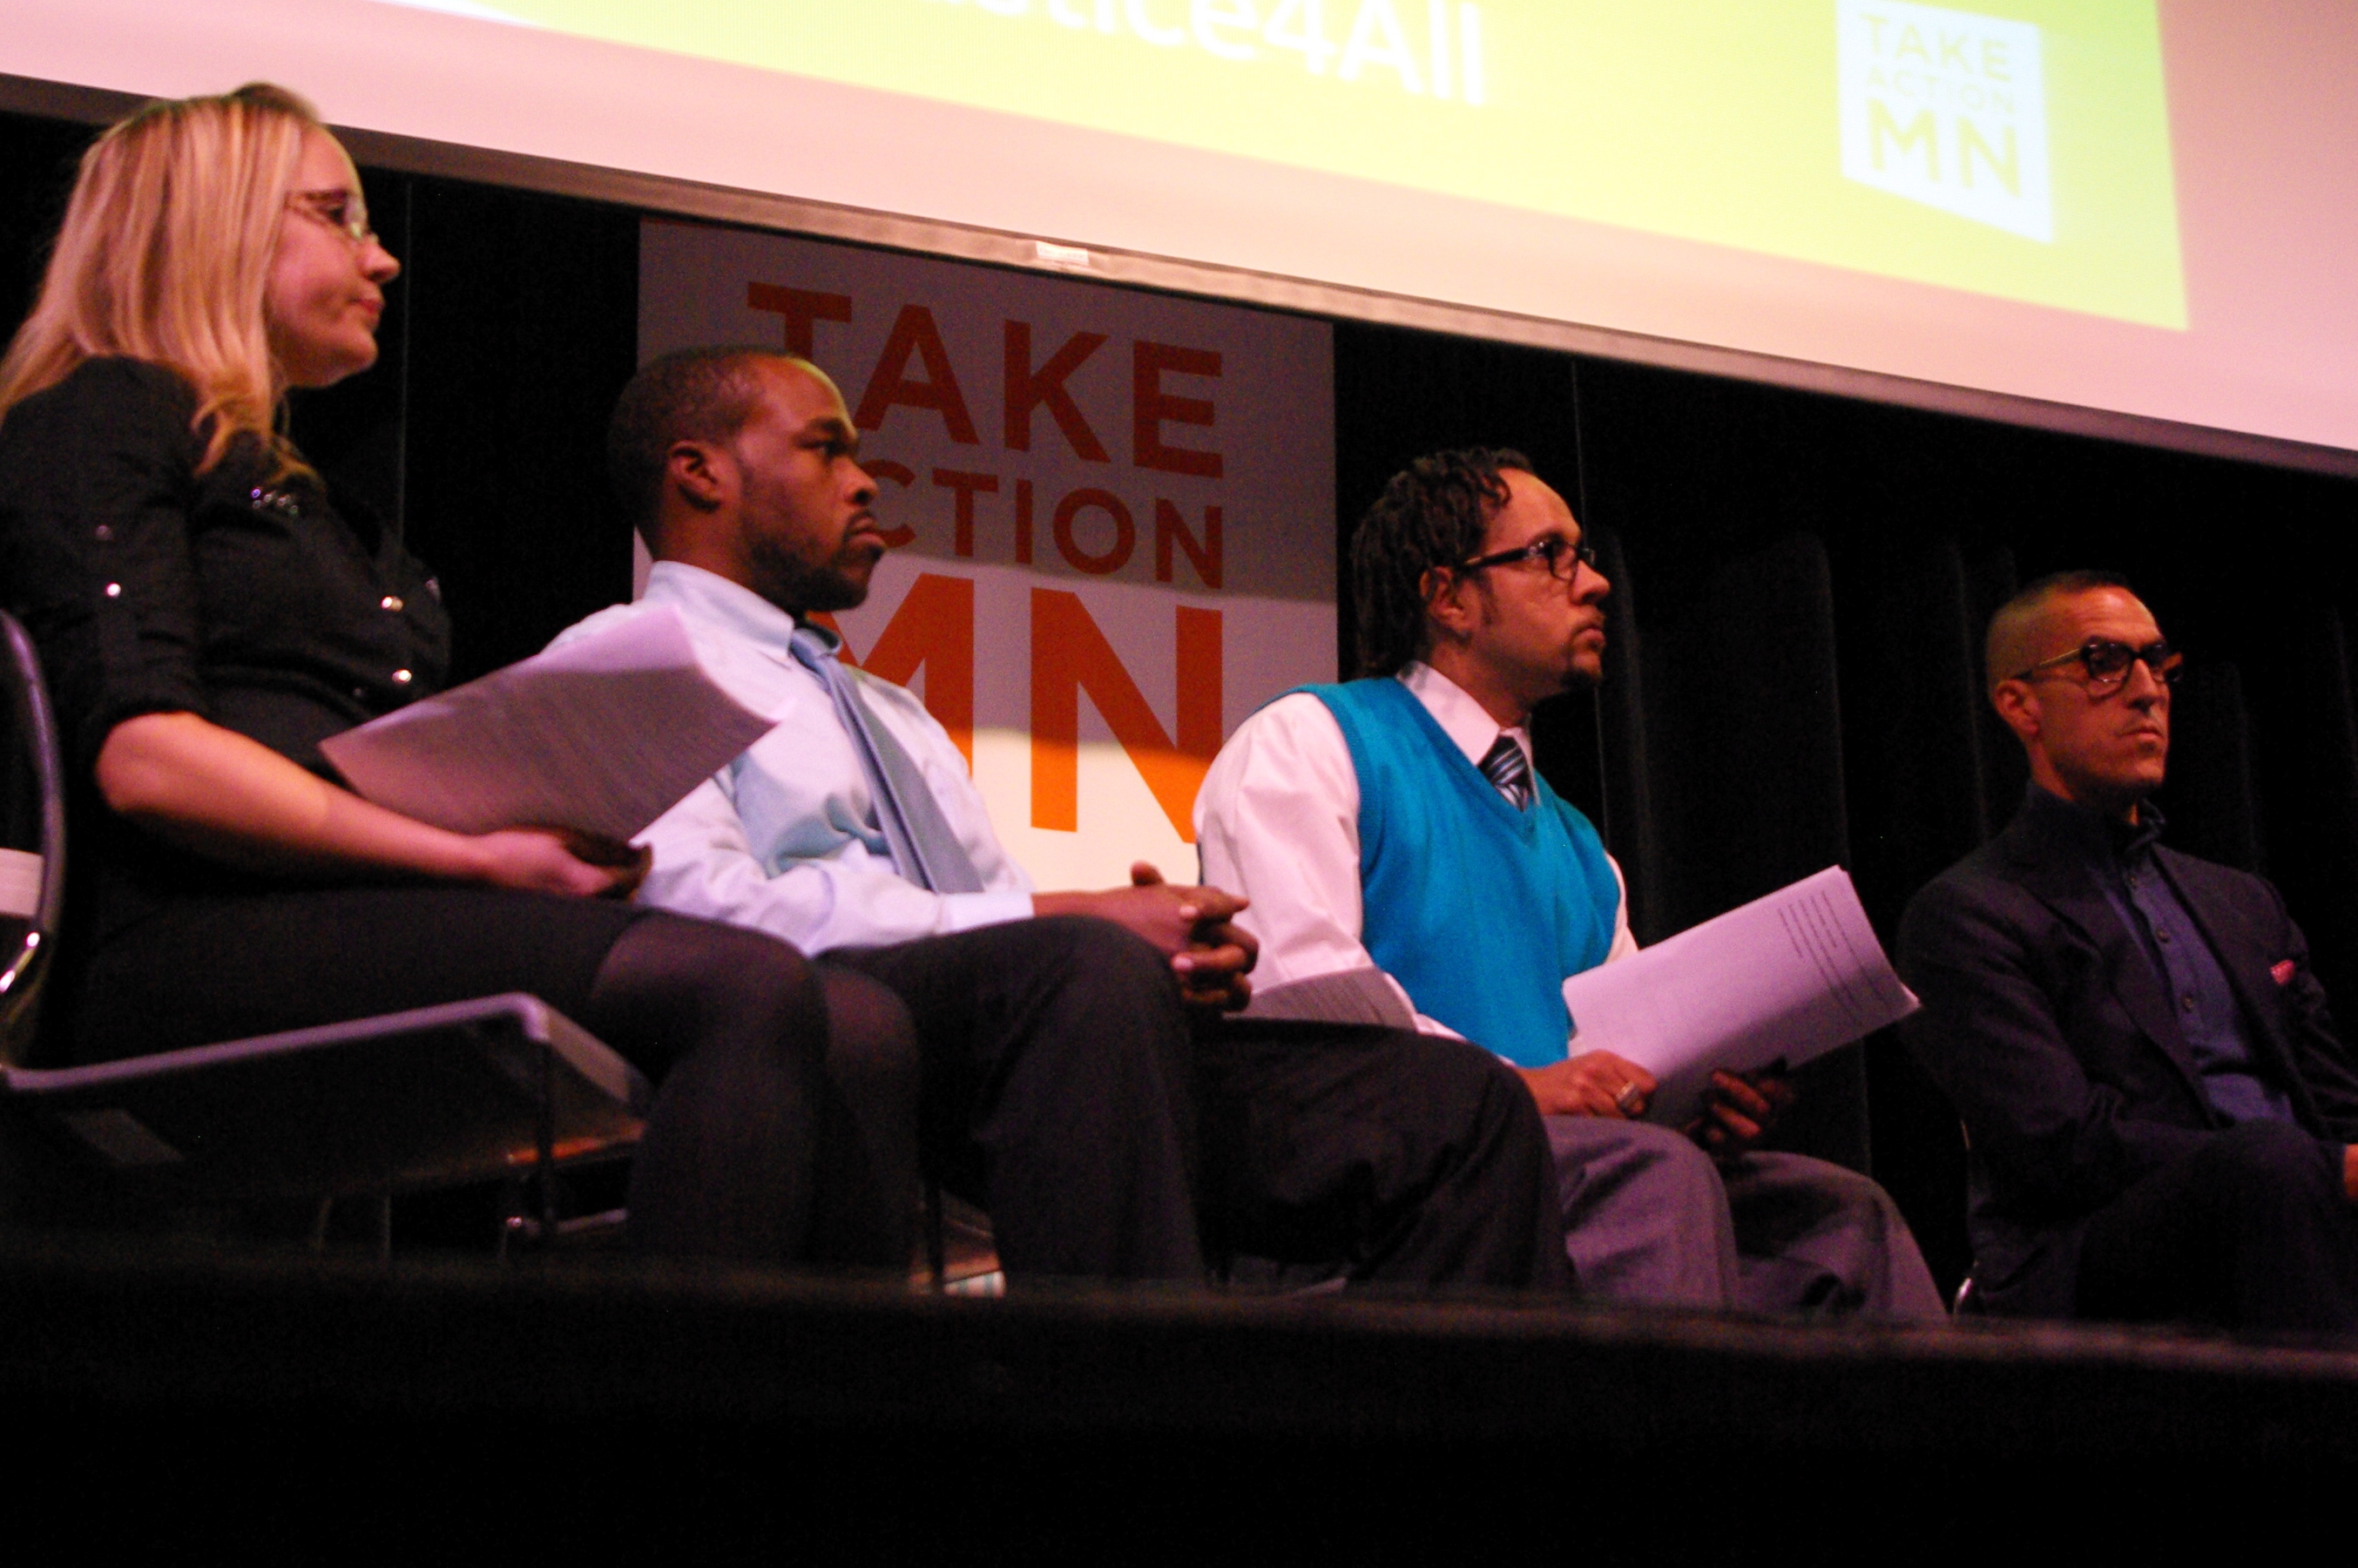 At TakeAction MN’s forum on October 24th, a panel spoke with more than 400 people about the need for employers to provide fair opportunities to job applicants who have been incarcerated.  Pictured (from left) are TakeAction MN Justice for All leaders Renee Zschokke, James Cannon, Jr., and Larcell Mack, and, on the far right, Jim Rowader, Vice President and General Council for Employee and Labor Relations at the Target Corporation.